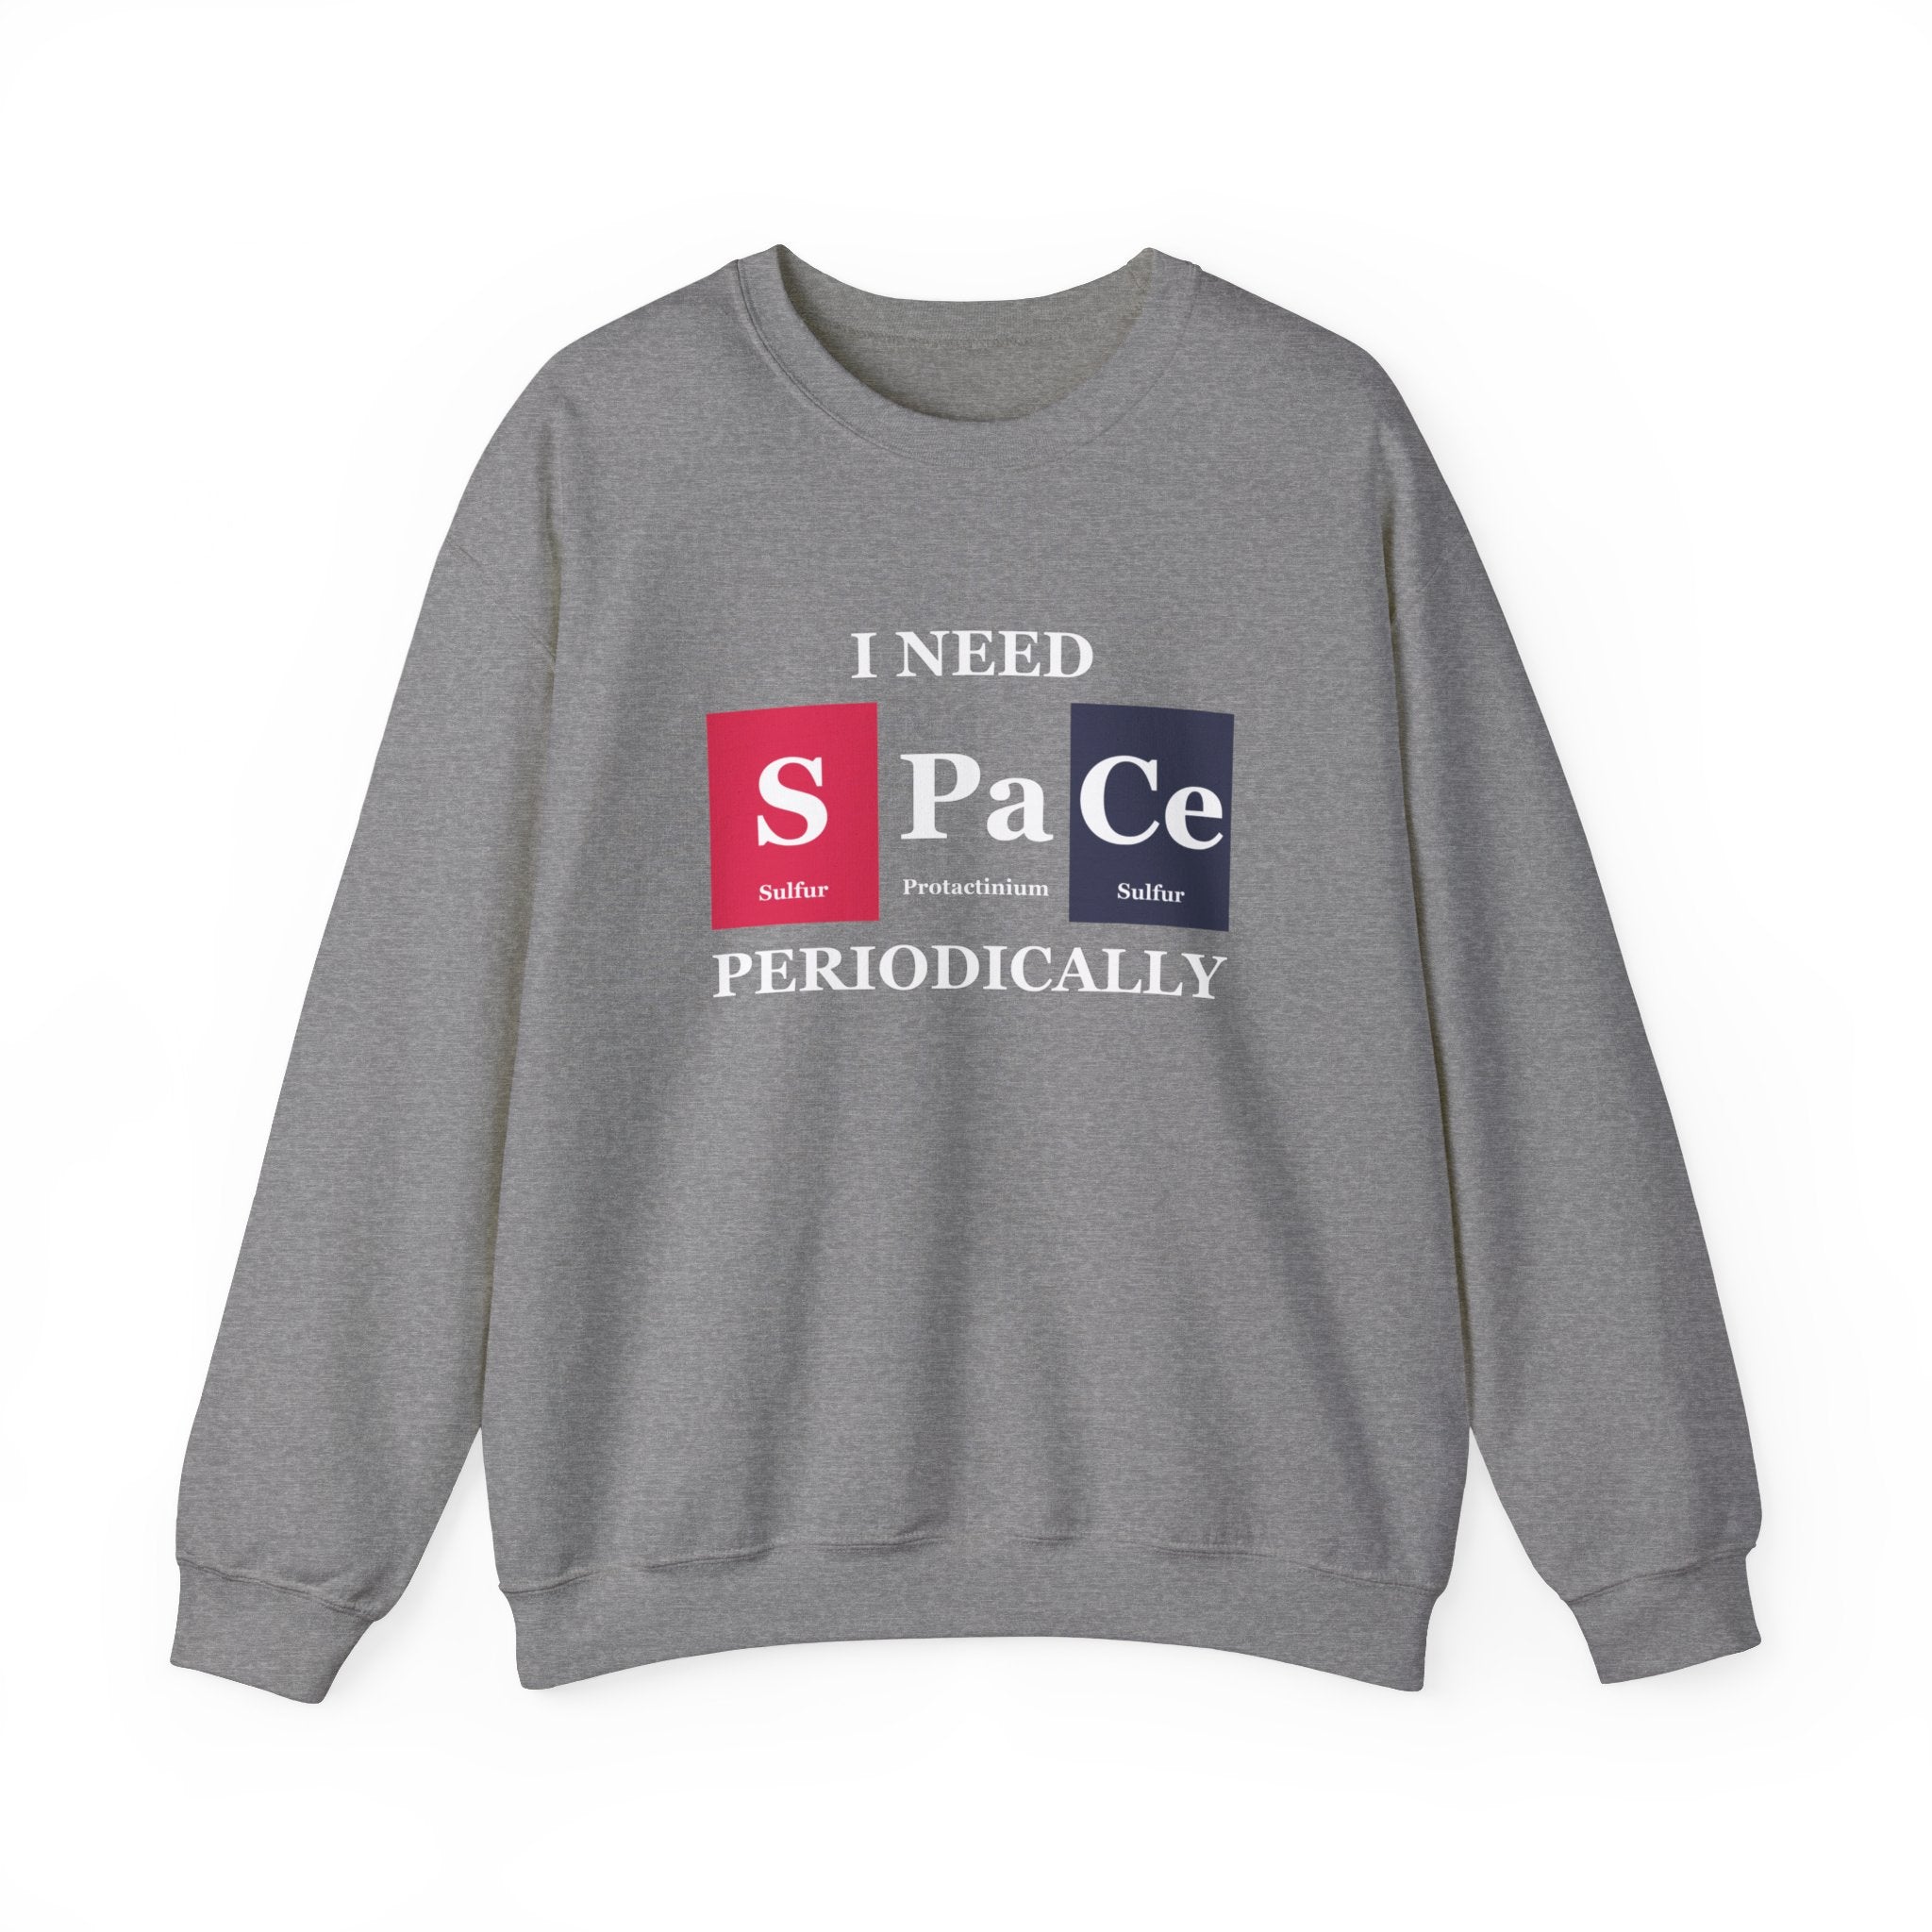 Gray S-Pa-Ce - Sweatshirt with a science-themed design featuring periodic table elements. This stylish casualwear piece reads "I NEED S Pa Ce PERIODICALLY," with Sulfur, Protactinium, and Cerium symbols highlighted. Perfect winter clothing to keep you cozy while showcasing your love for science.